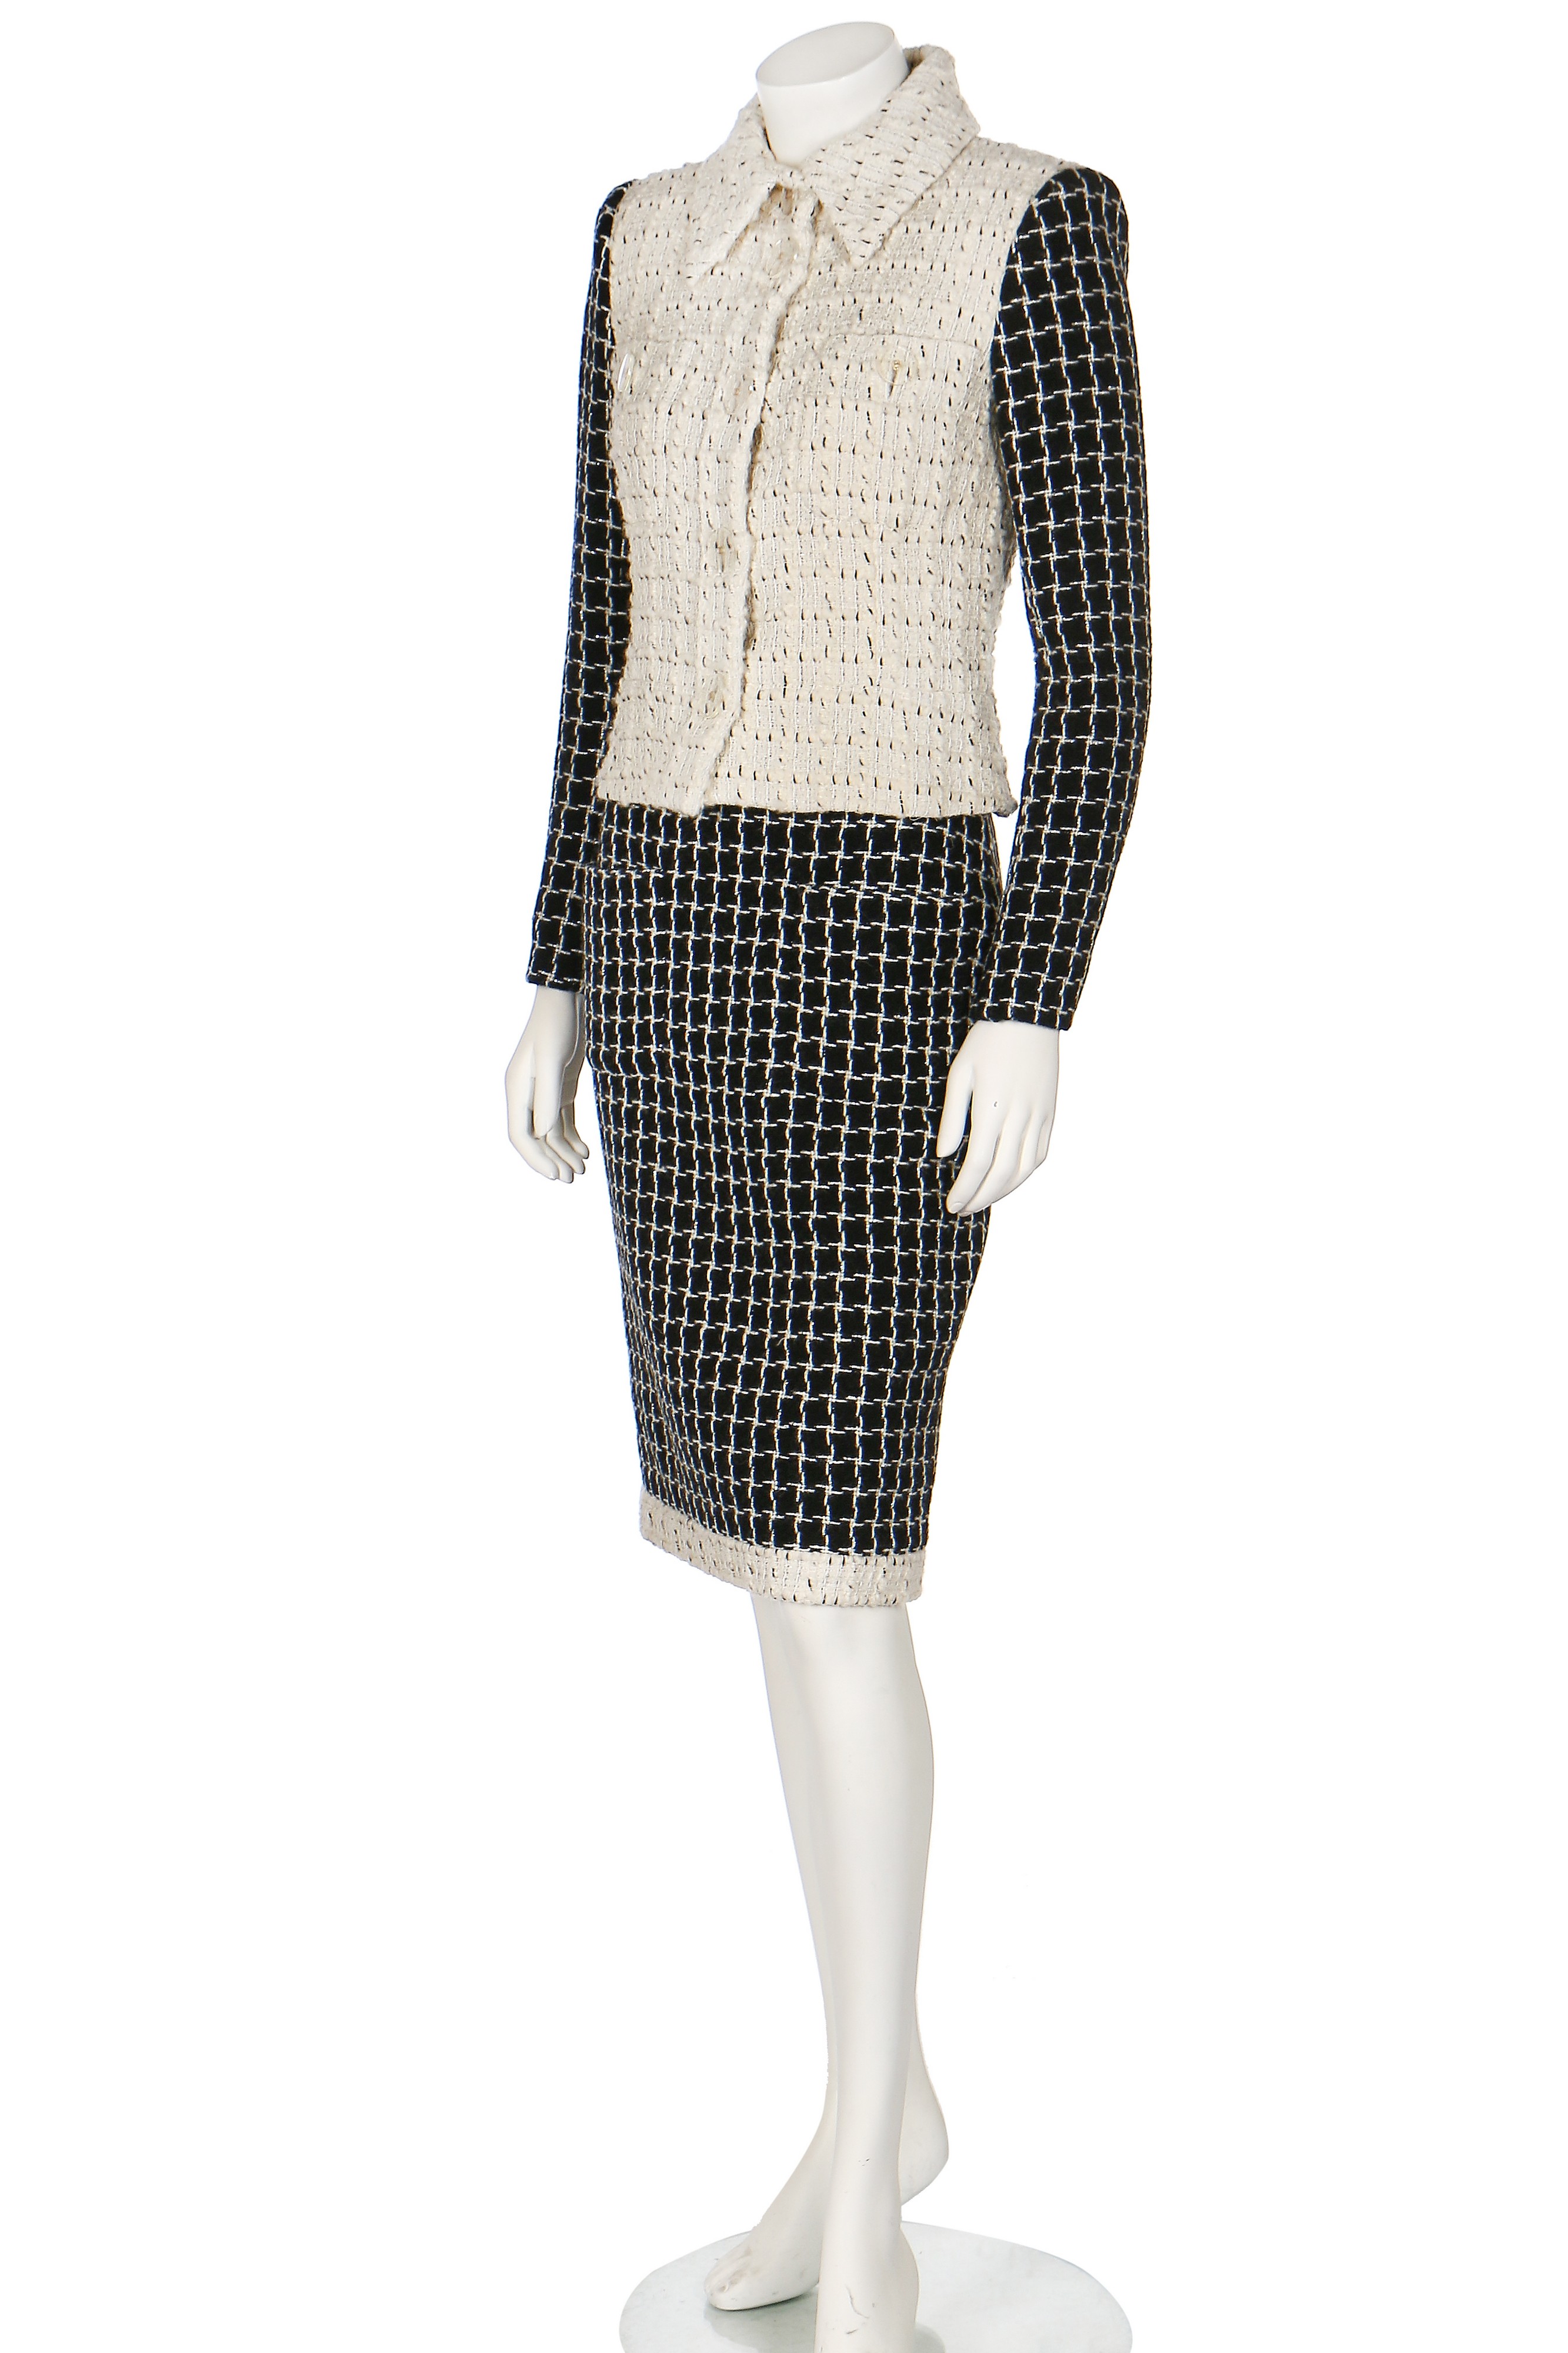 Lot 12 - A Chanel contrasting monochrome tweed suit,